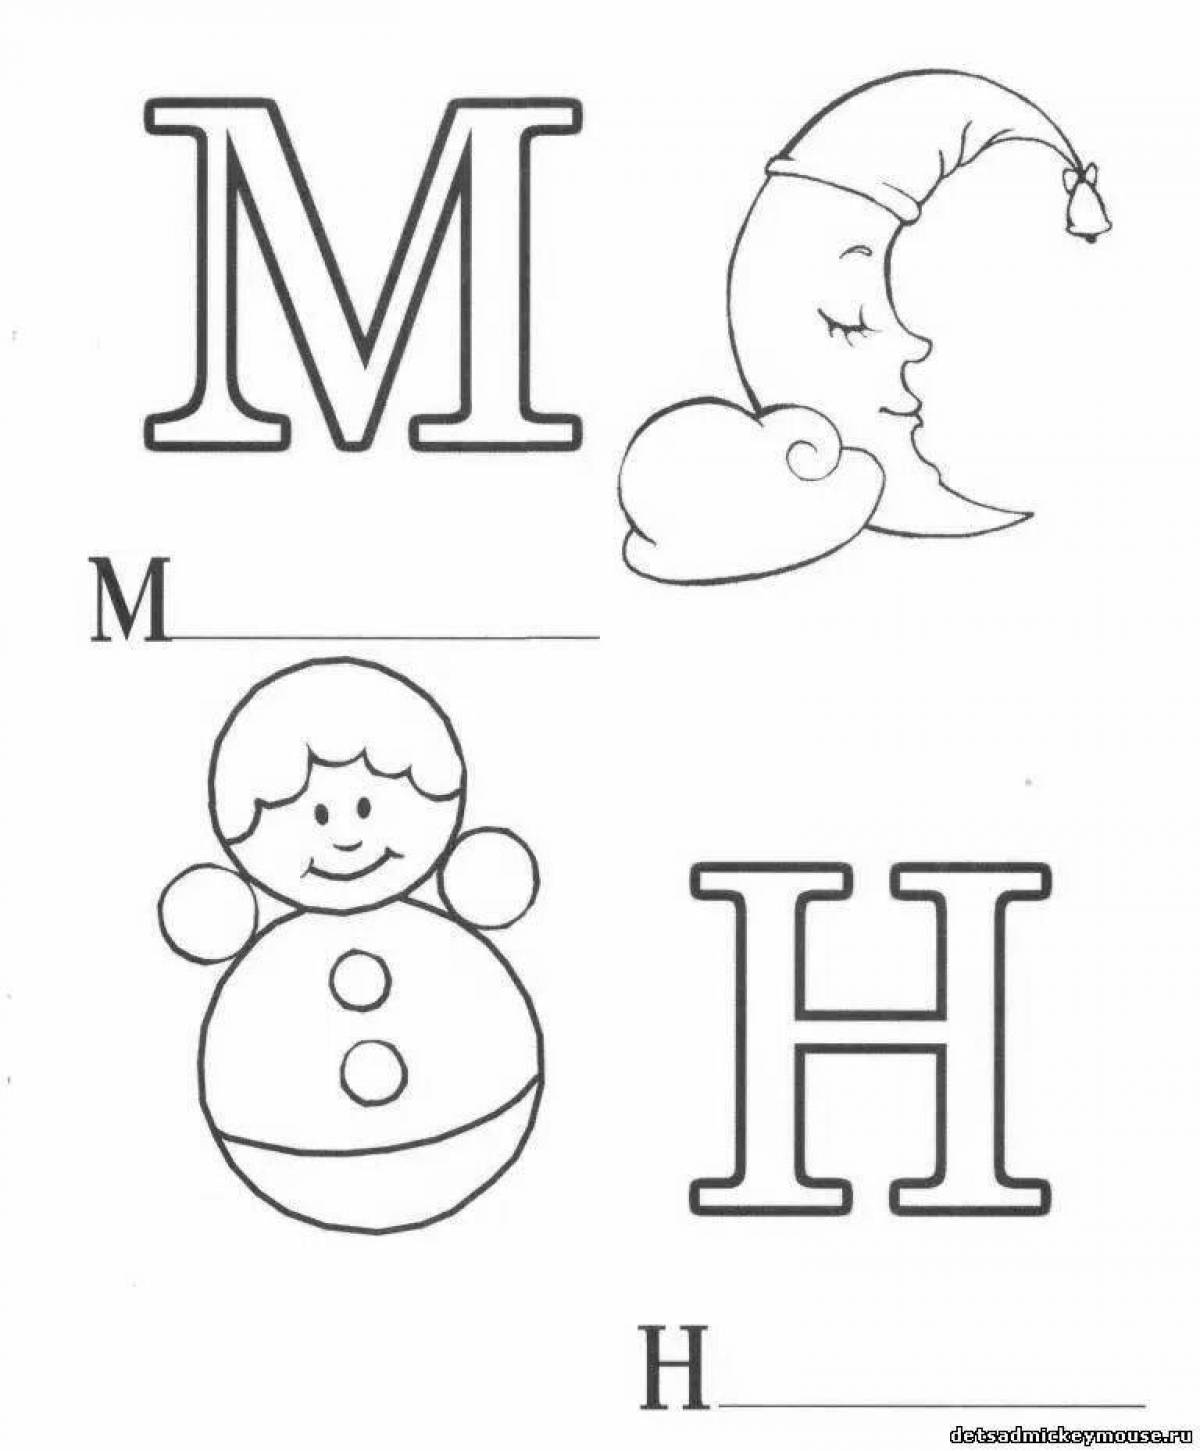 Coloring letters for children 3-4 years old